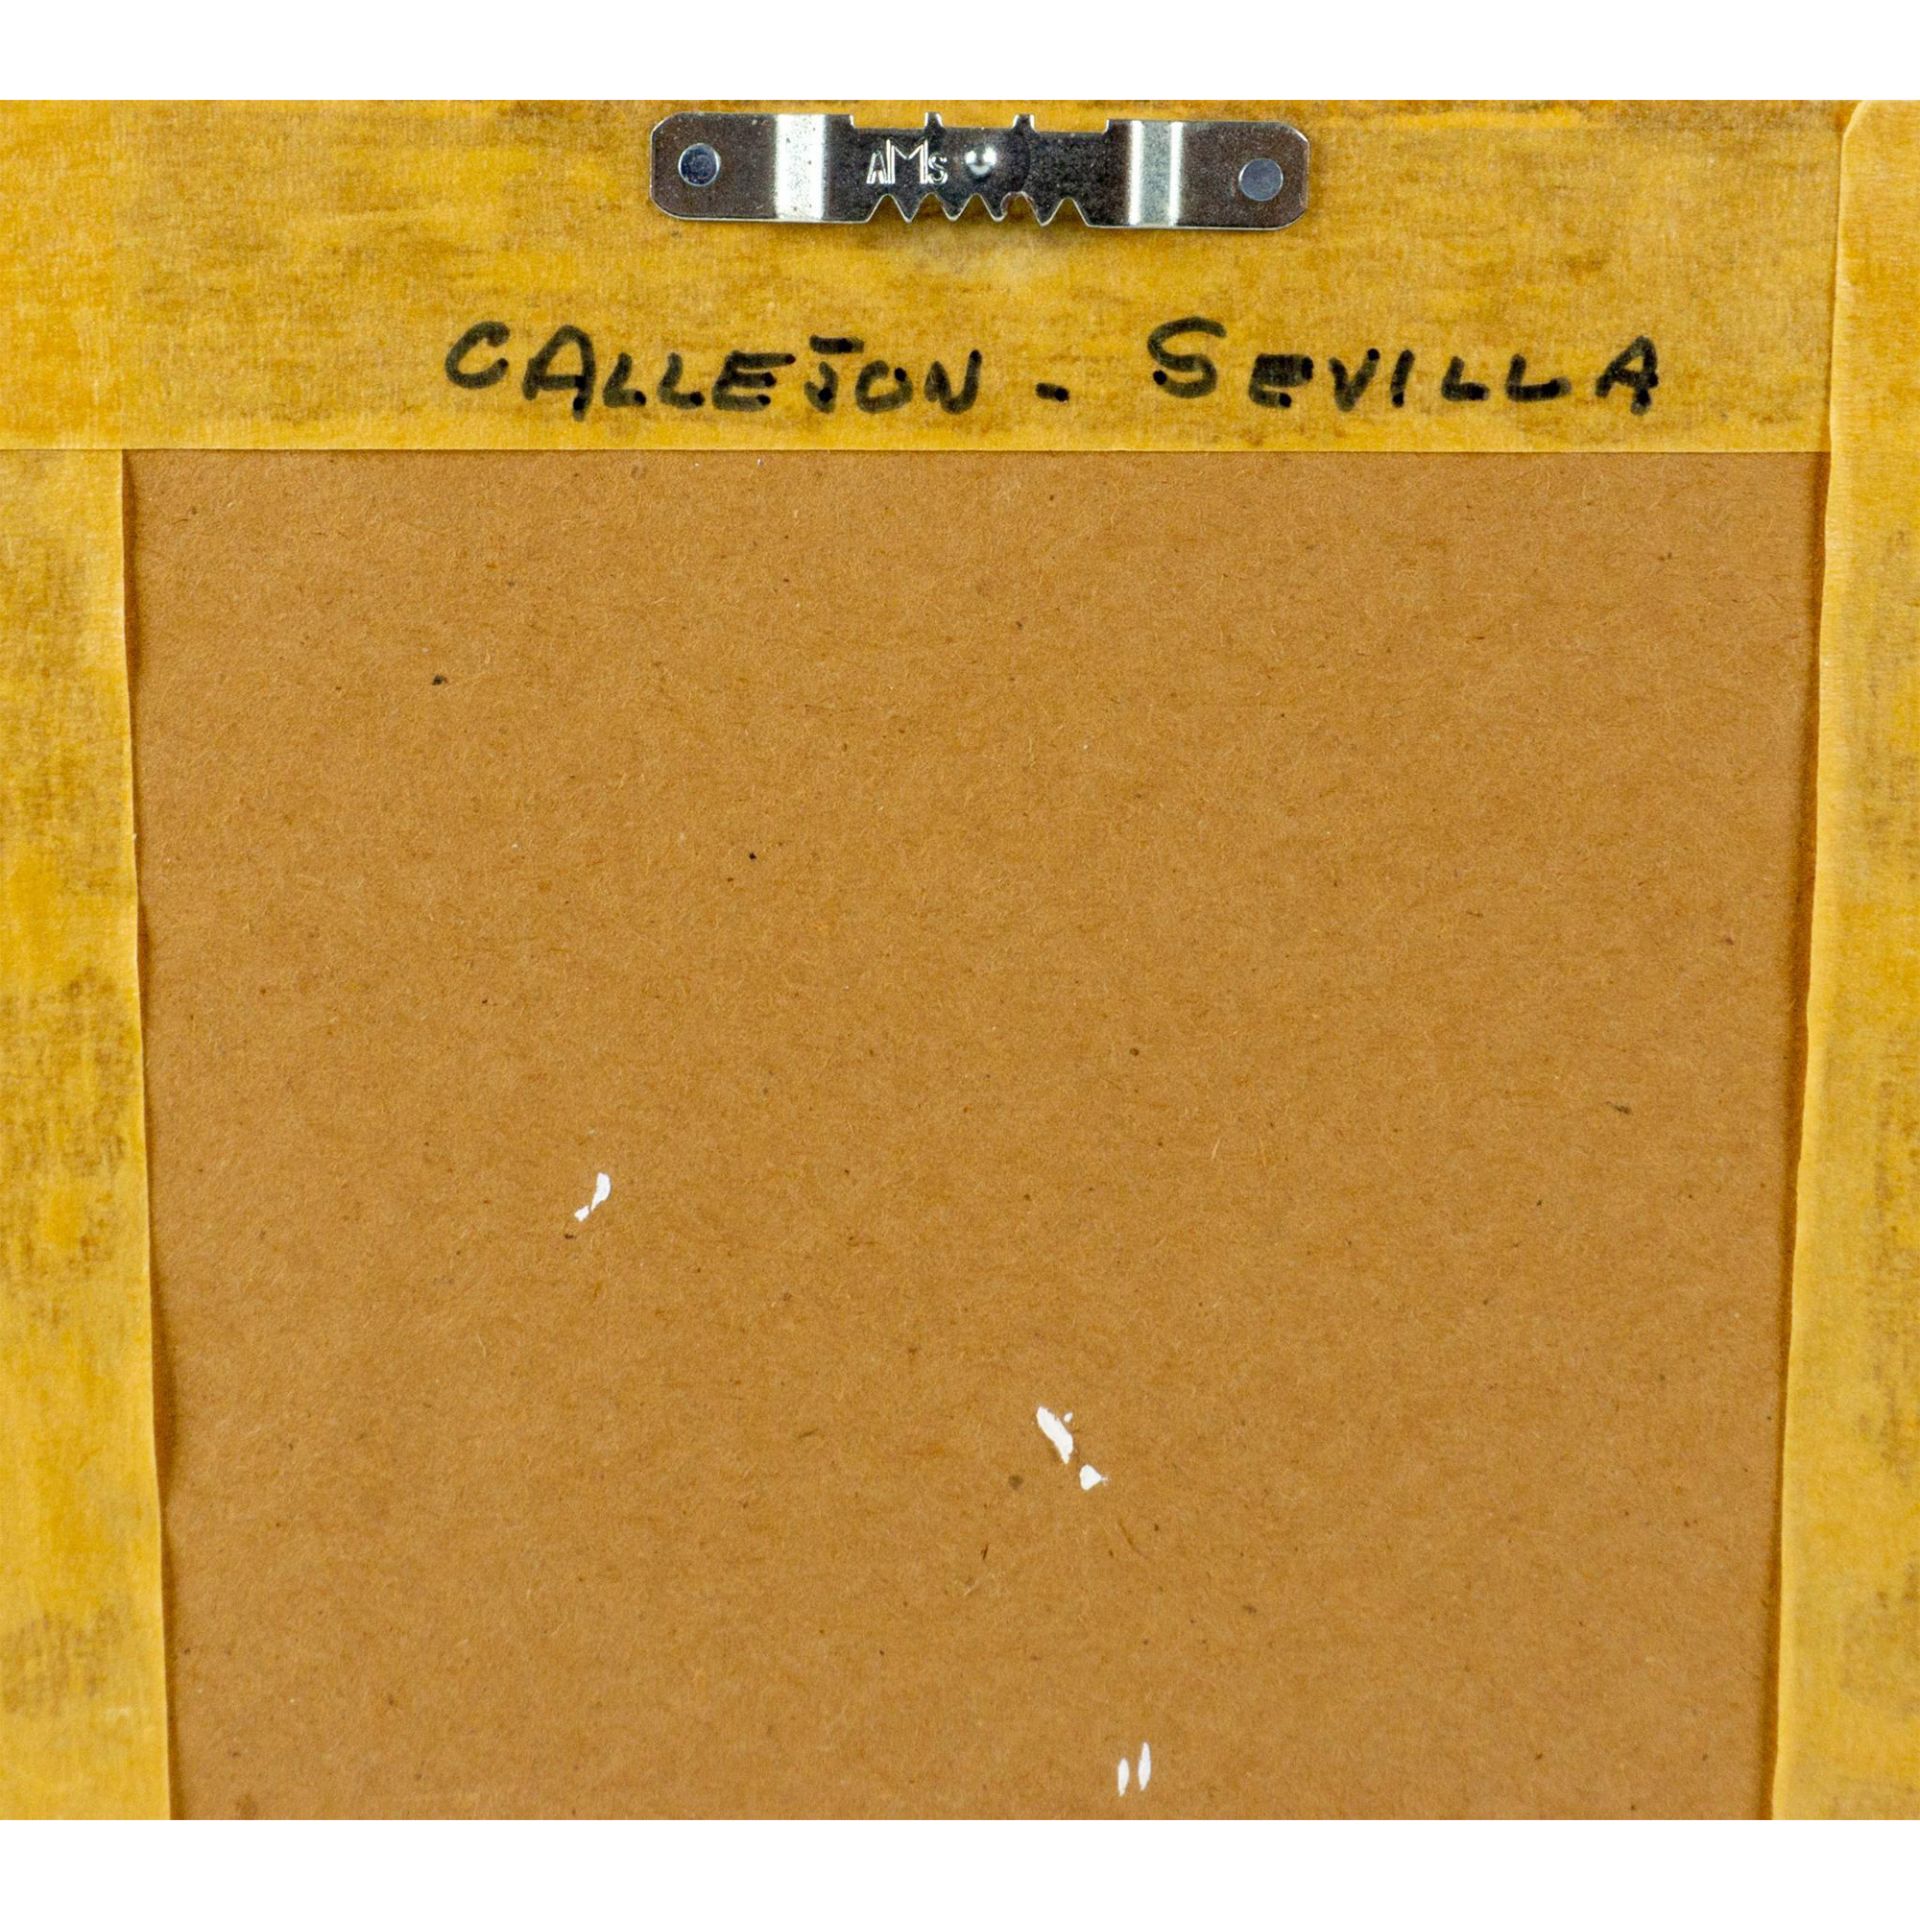 Artist Signed Acrylic Painting on Canvas, Callejon - Image 6 of 6